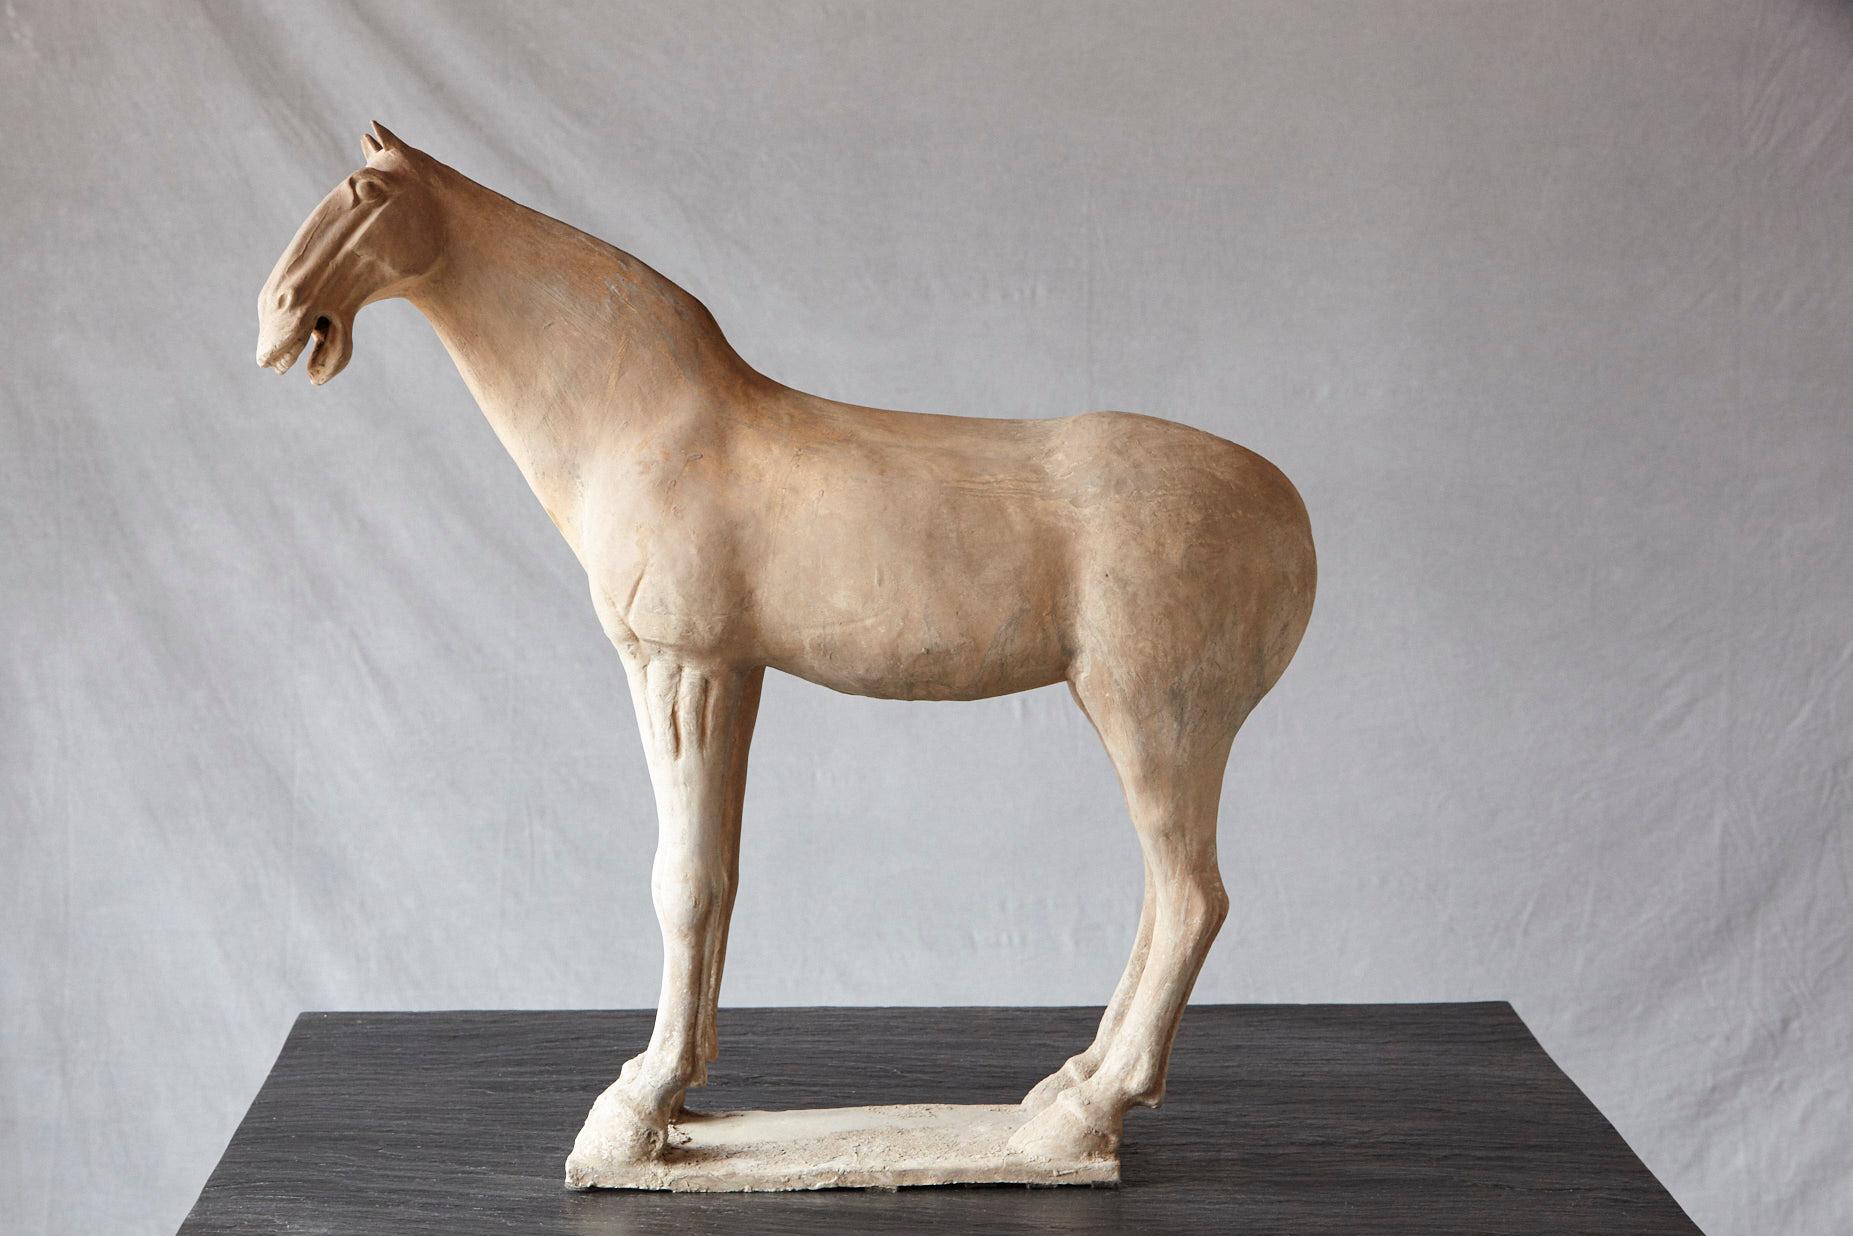 Impressive and very decorative large terracotta horse modeled in the style of the sculptures from the Tang dynasty.
The sculpture shows the raw beauty of the pure, untreated terracotta and is in excellent condition.